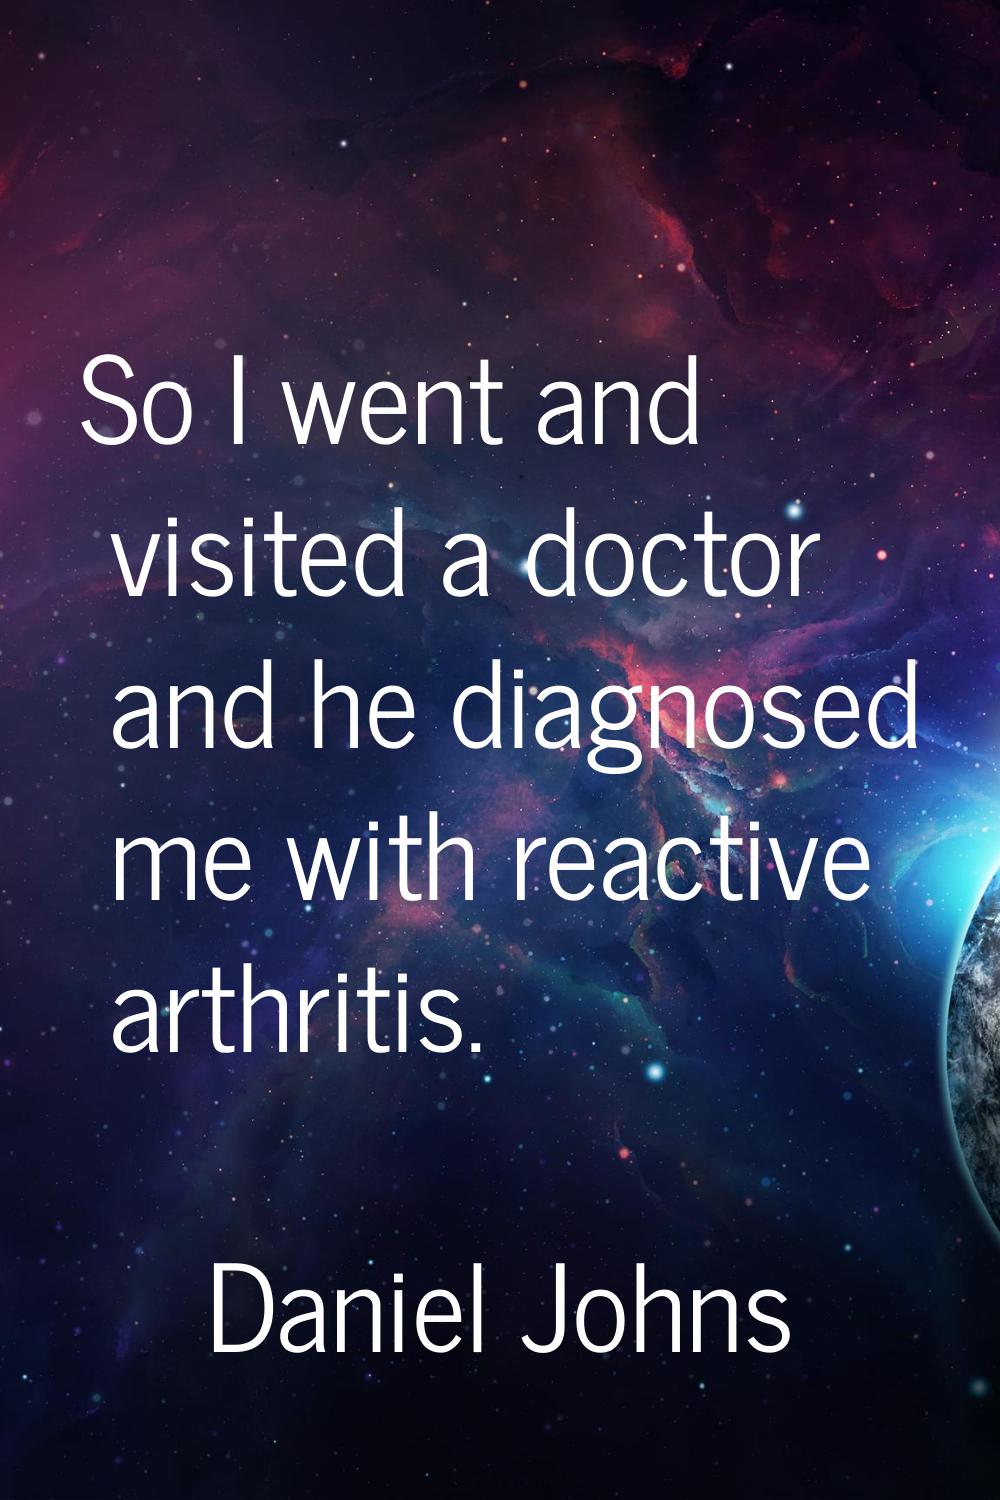 So I went and visited a doctor and he diagnosed me with reactive arthritis.